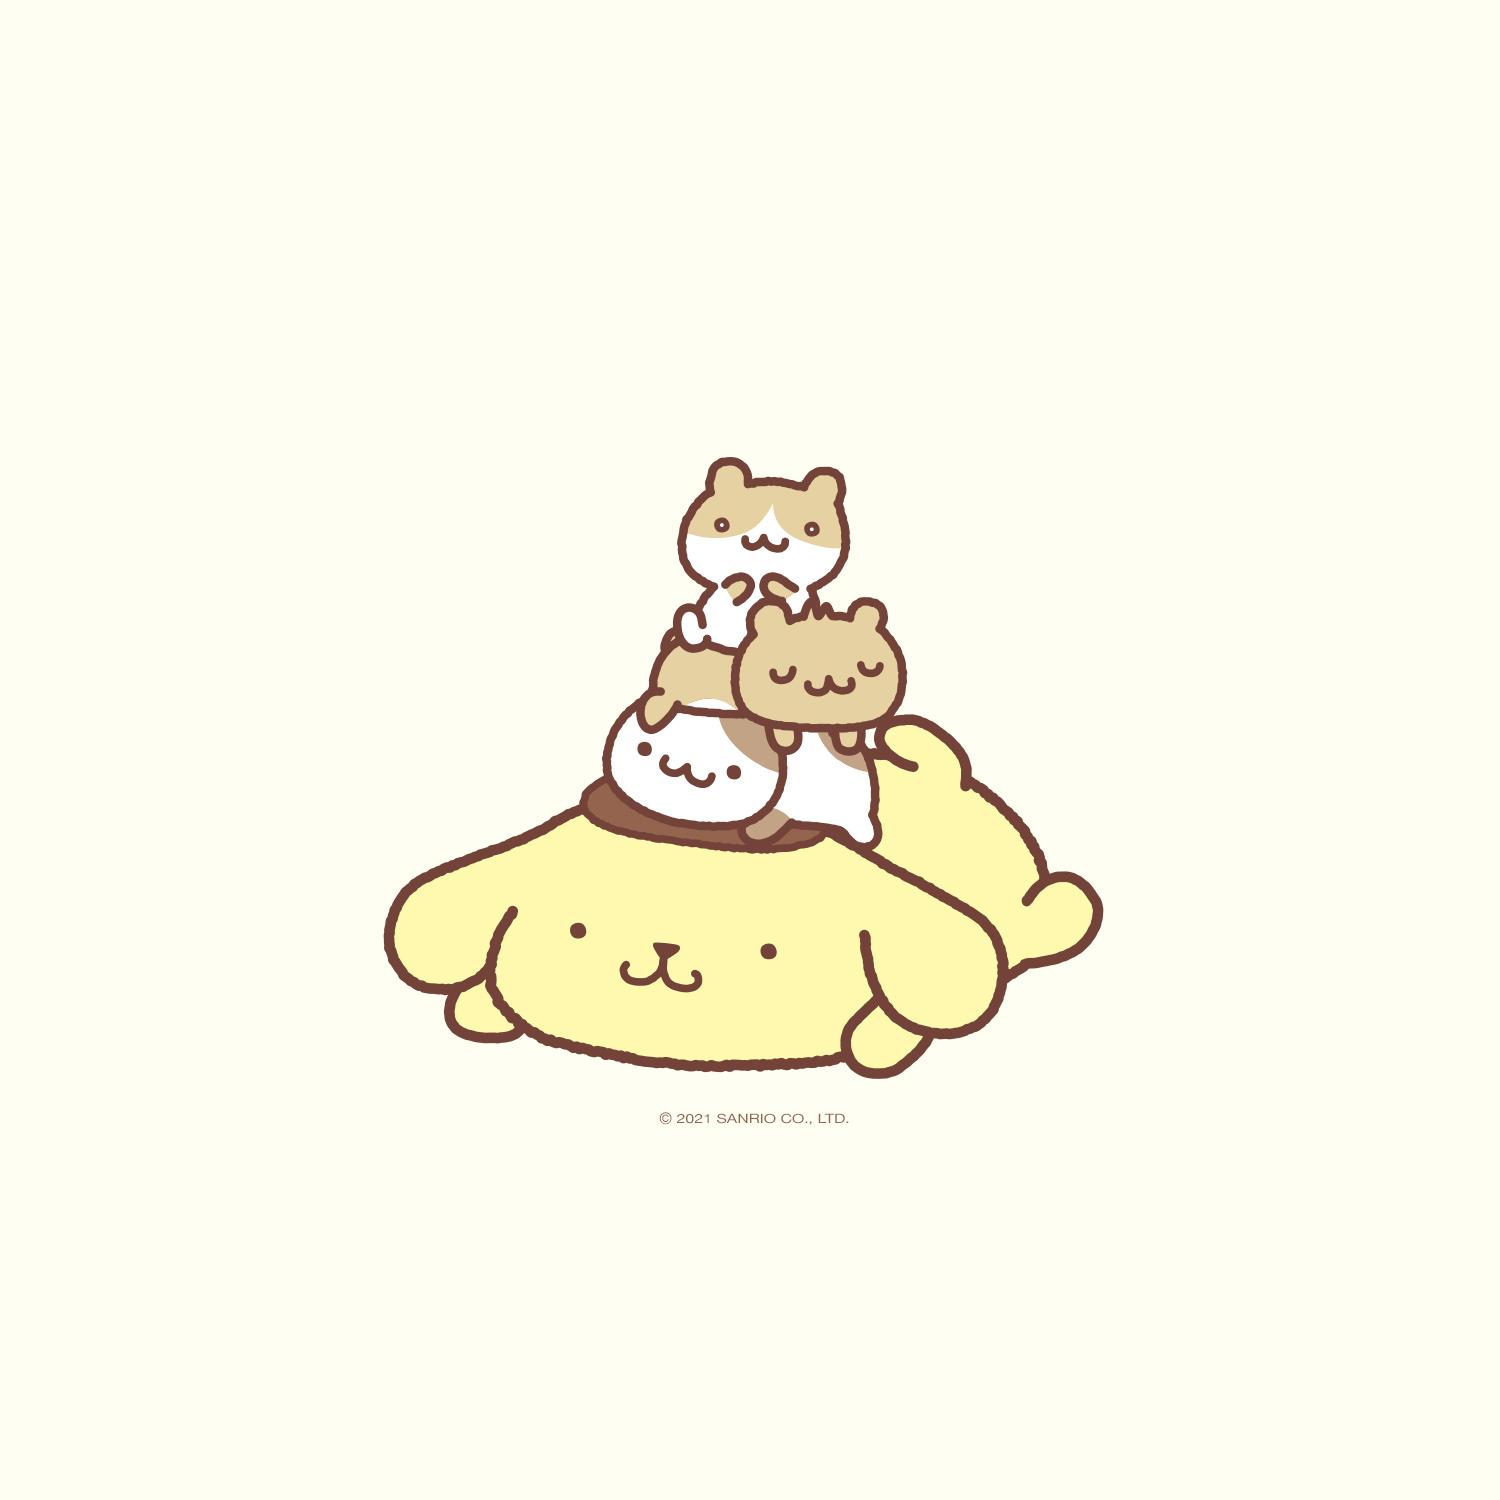 A cute illustration of a dog with three cats on top of it. - Sanrio